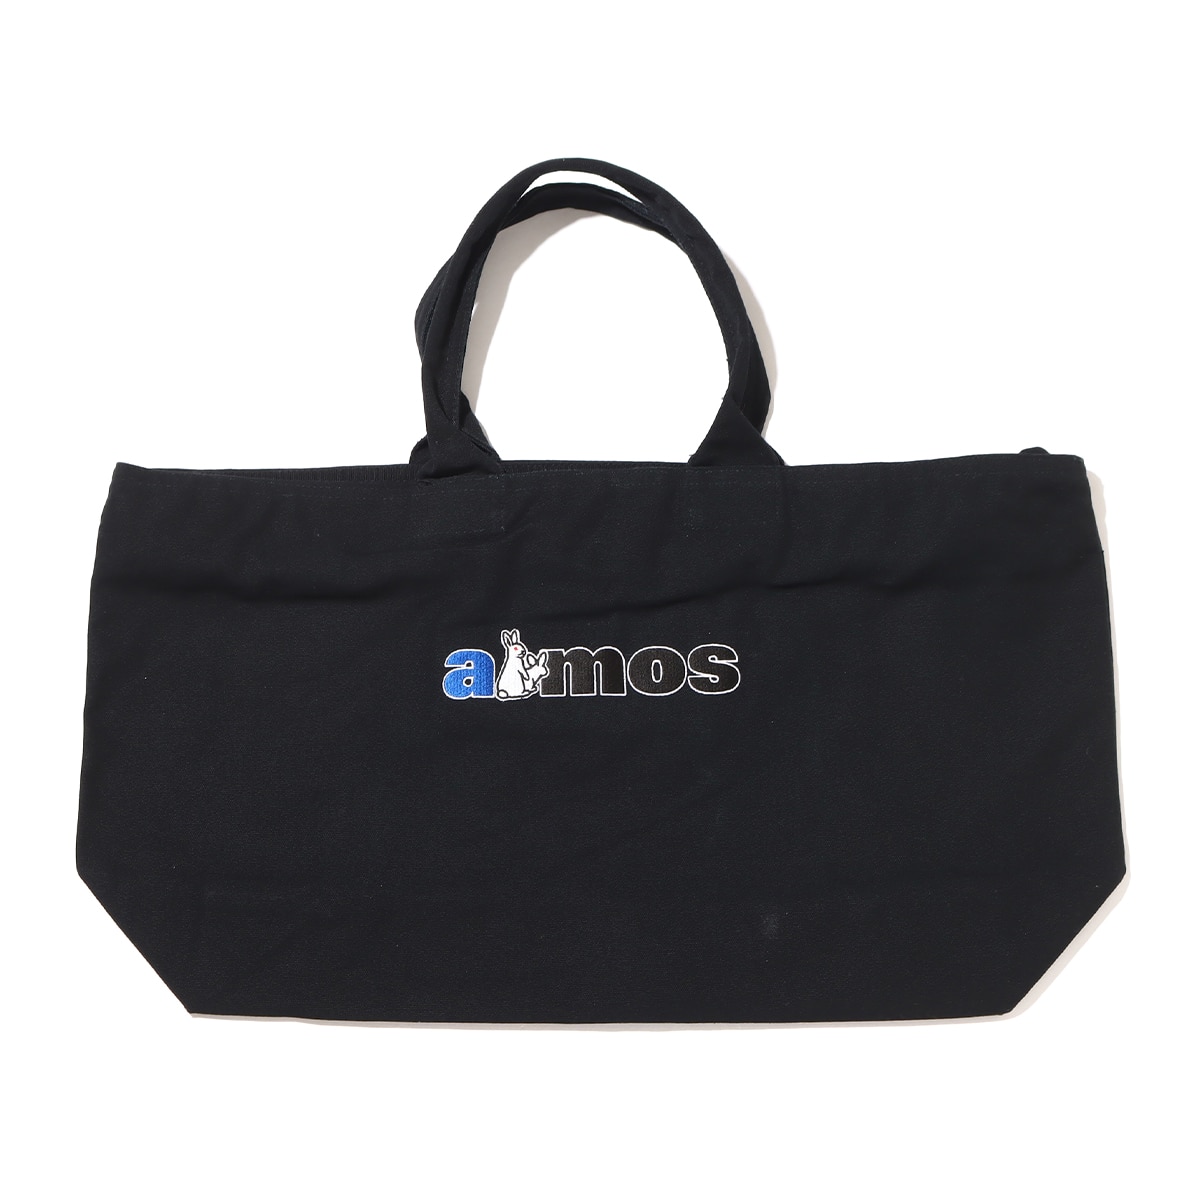 FR2 #FR2DOKO collaboration with atmos Tote Bag ブラック 22FA-I_photo_large